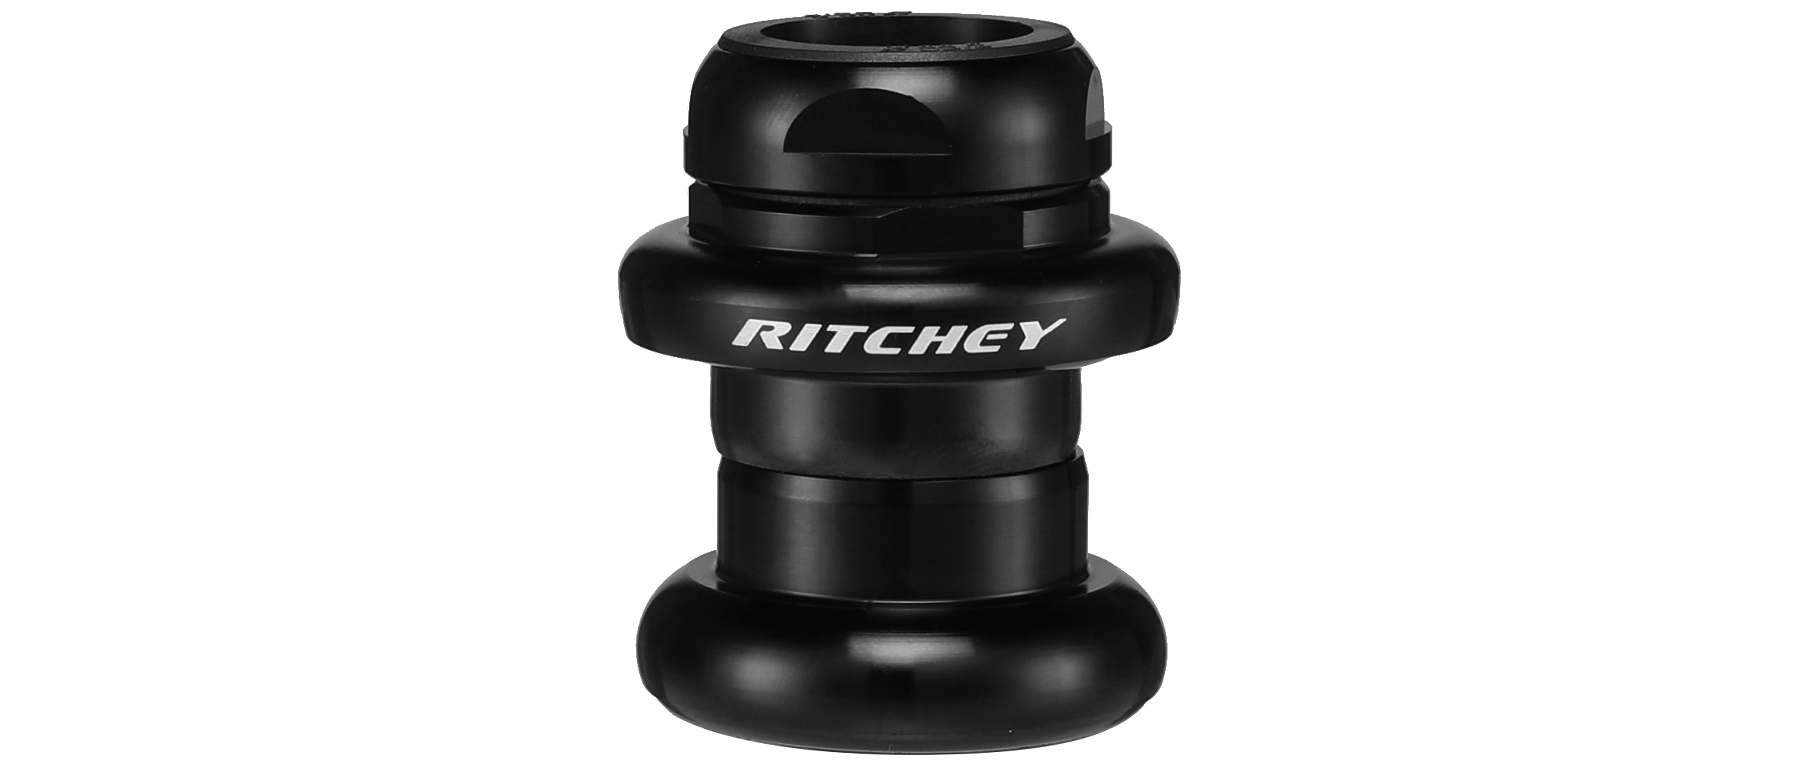 Ritchey Fit Headset Ext Cup EC30|25.4 Threaded 1in